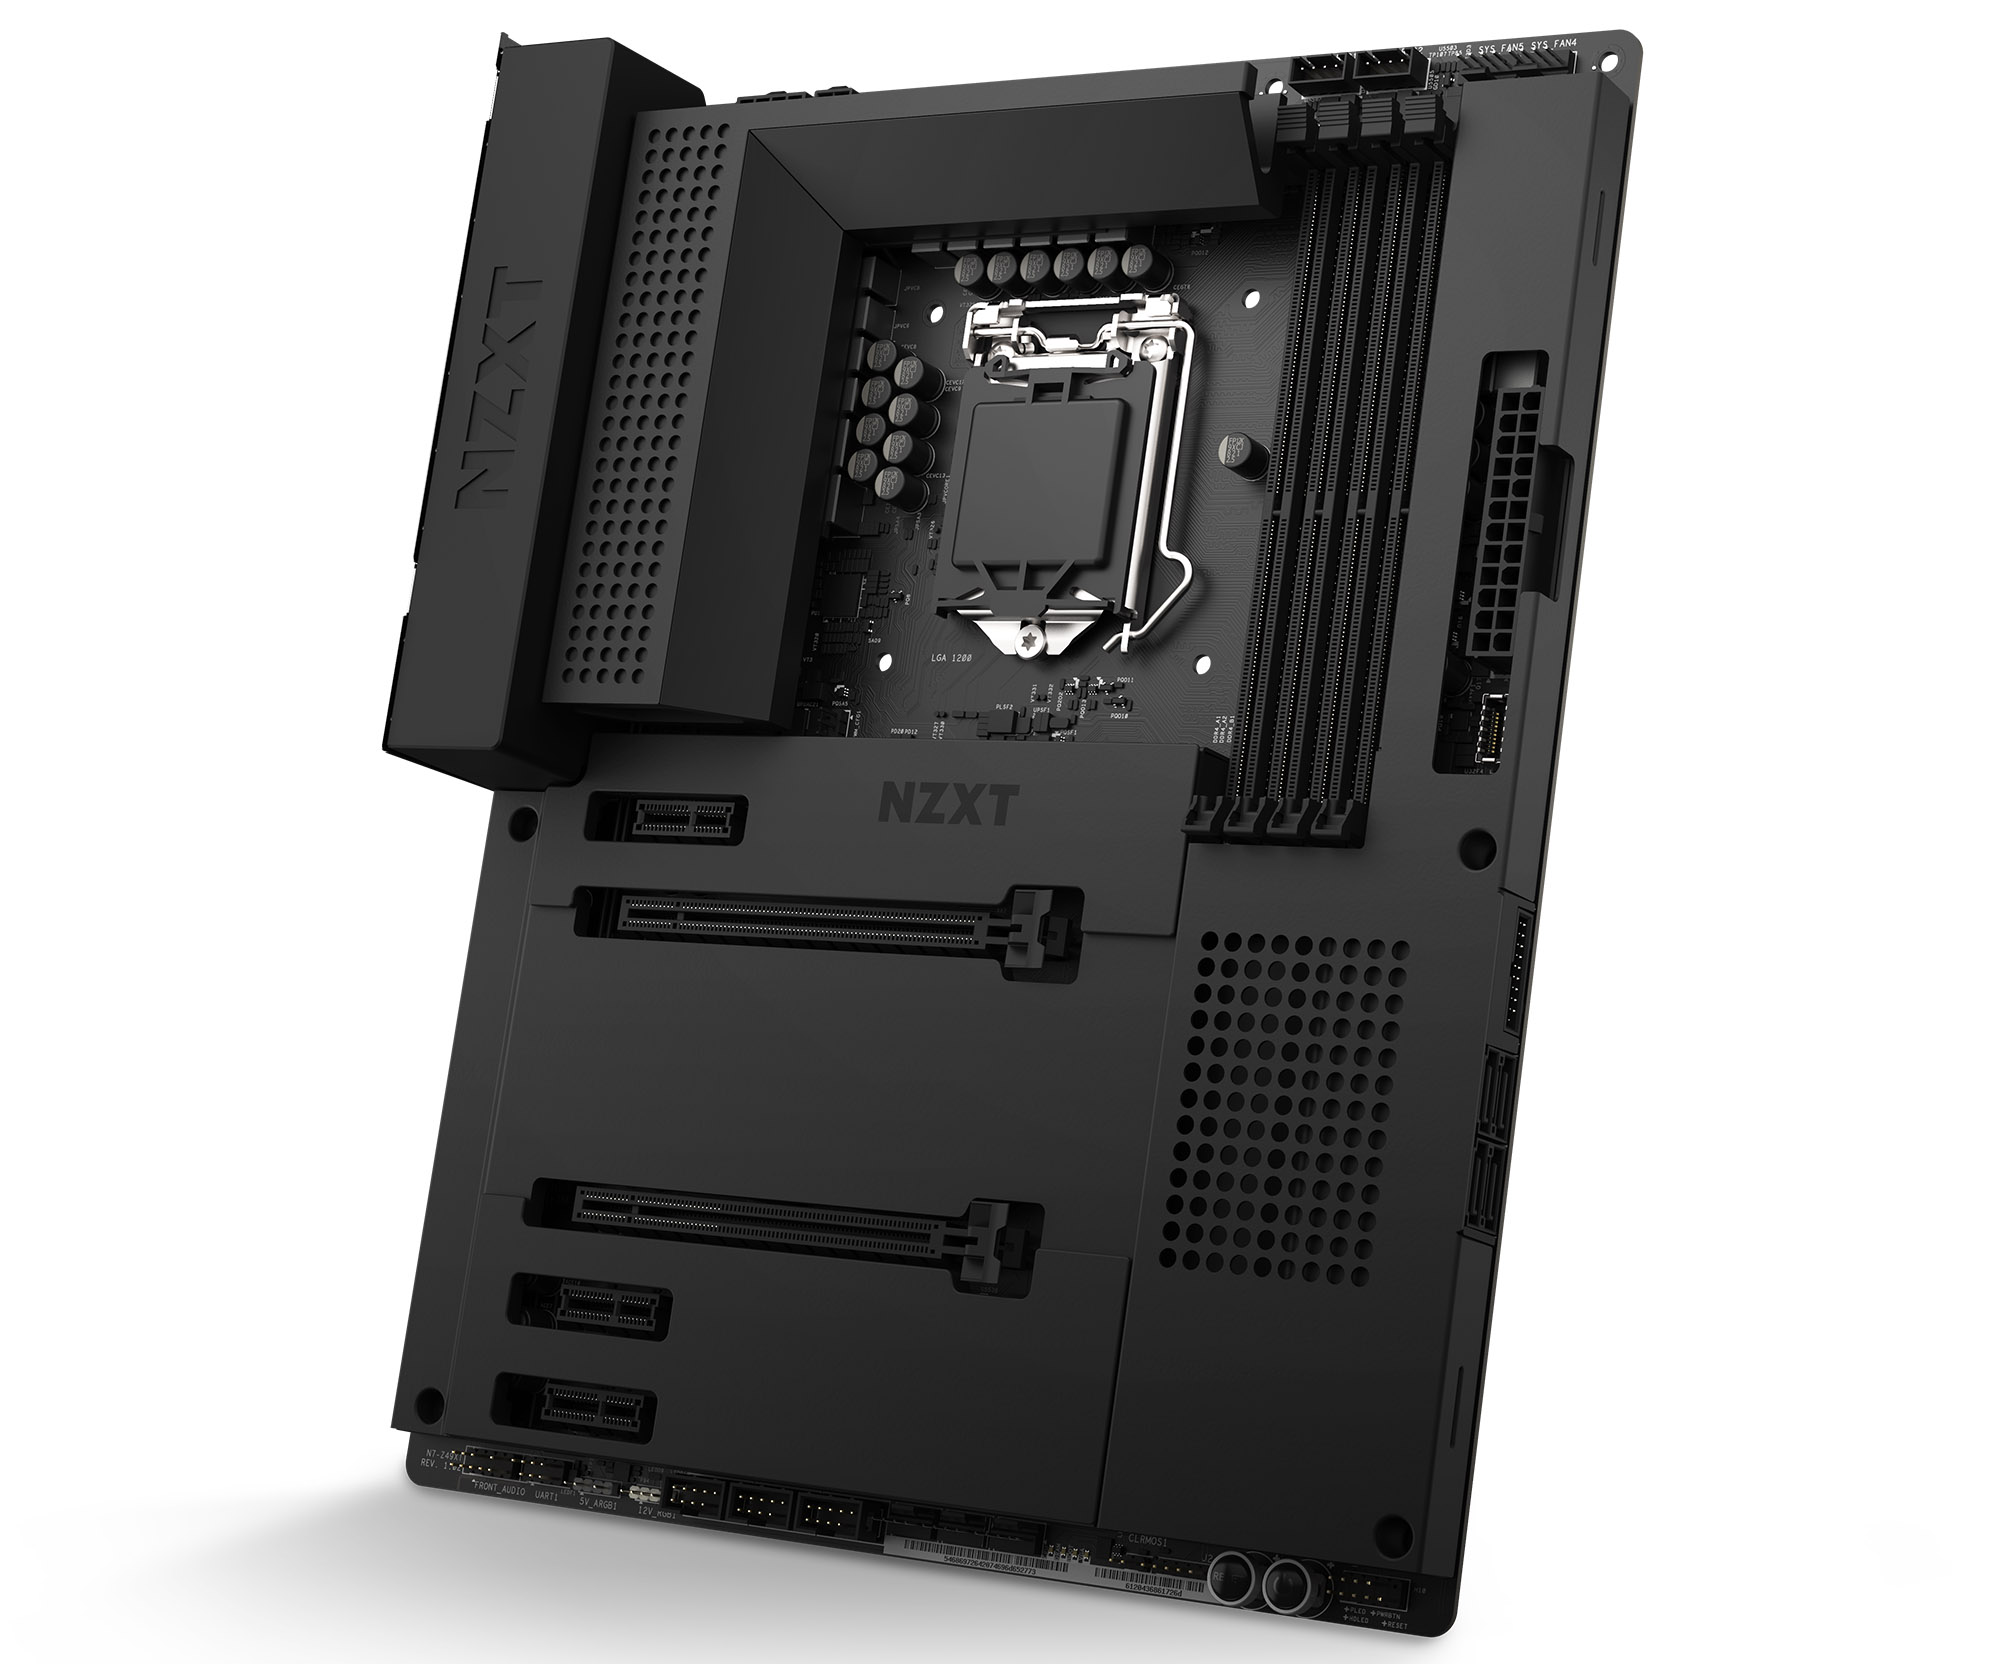 NZXT N7 Z490 Motherboard Review